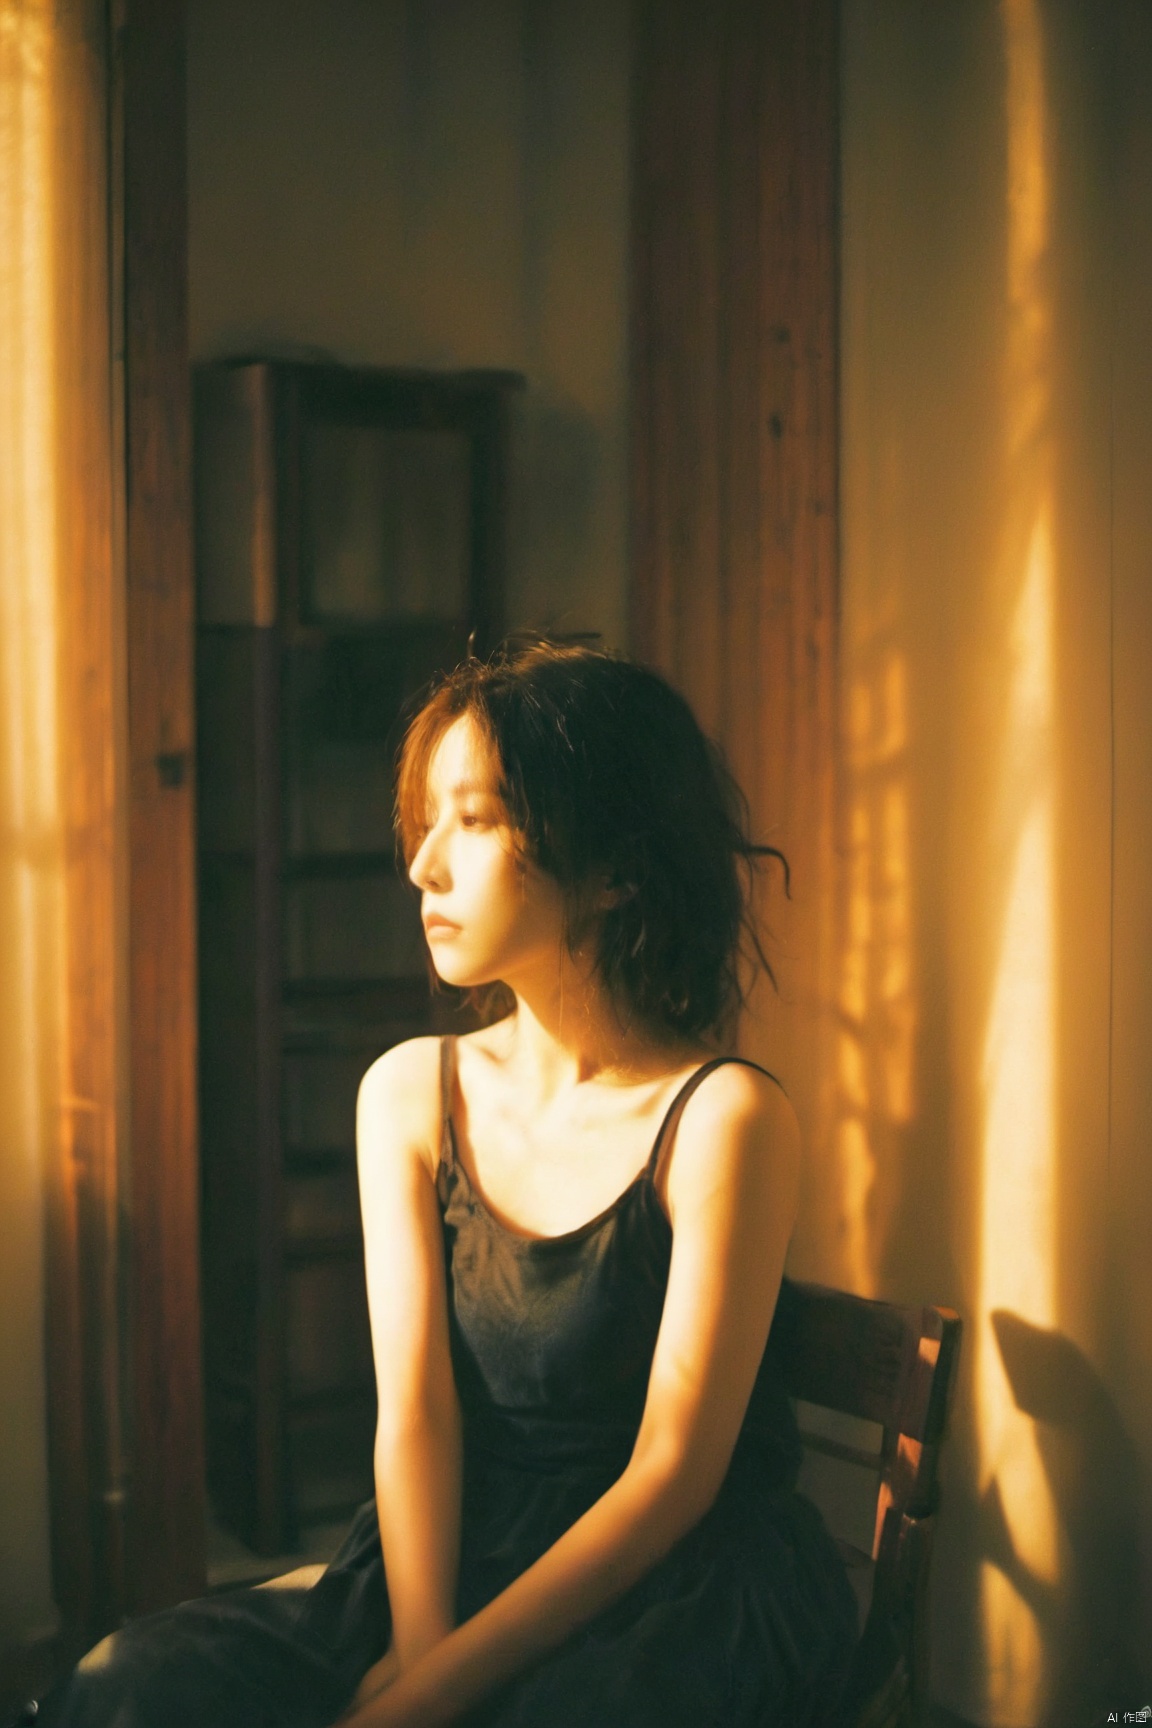  best quality,film grain,1girl, candlelight, moody lighting, dark atmosphere, black **** top, seated, wooden chair, contemplative expression, indoors, night, shadows, window blinds, soft focus, warm color tones, vintage look, young *****, serene, elegant, mysterious